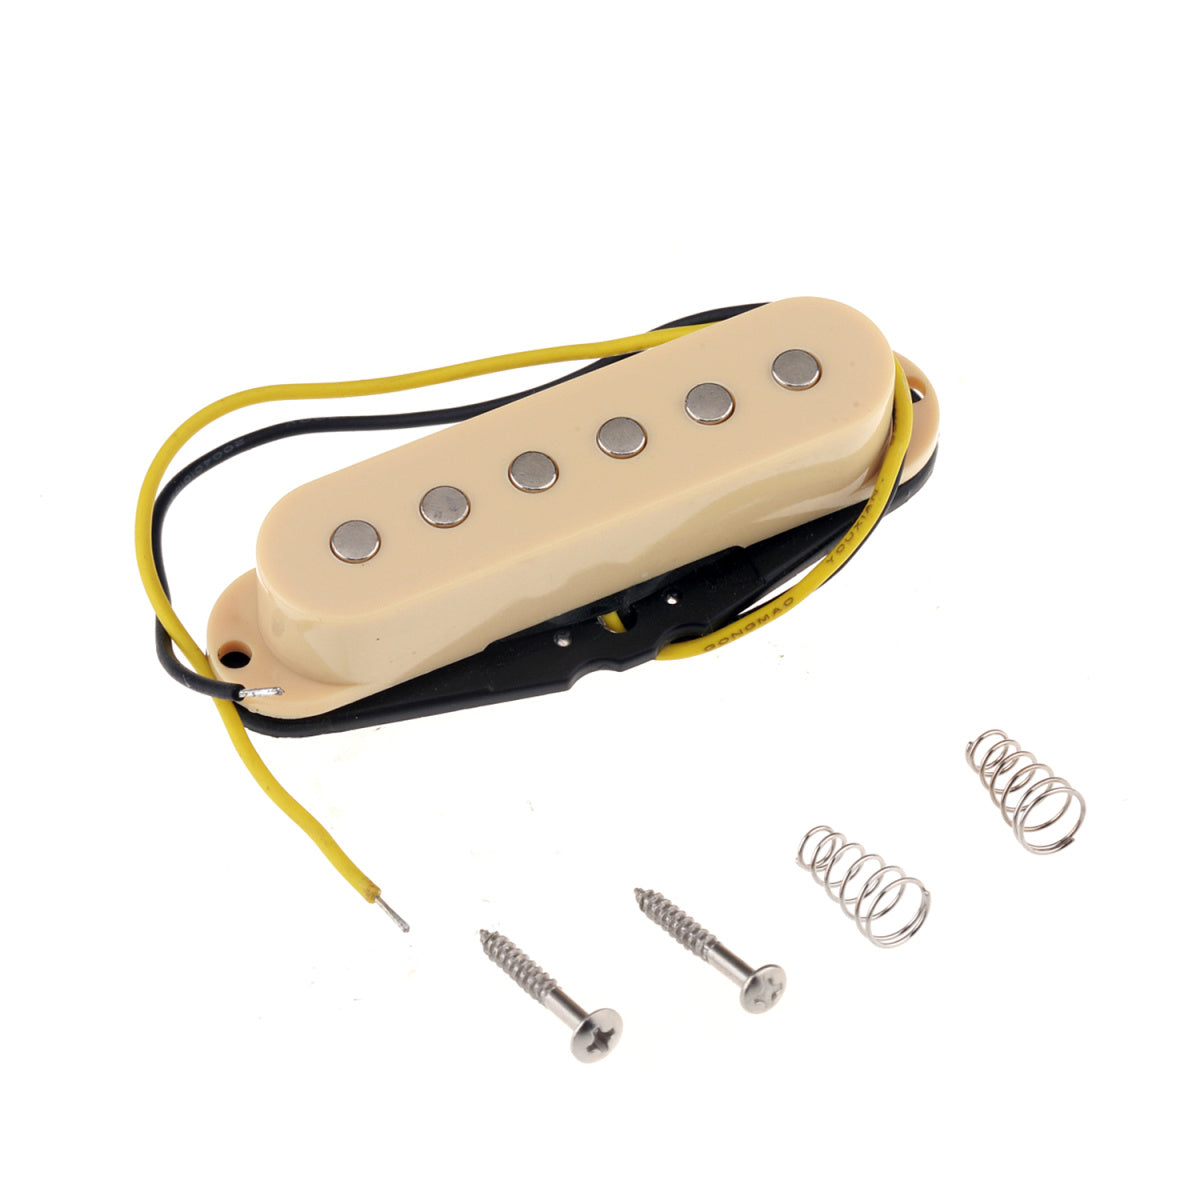 Musiclily 50mm Guitar Single coil Middle Pickup for Strat or Squier  Style, Cream